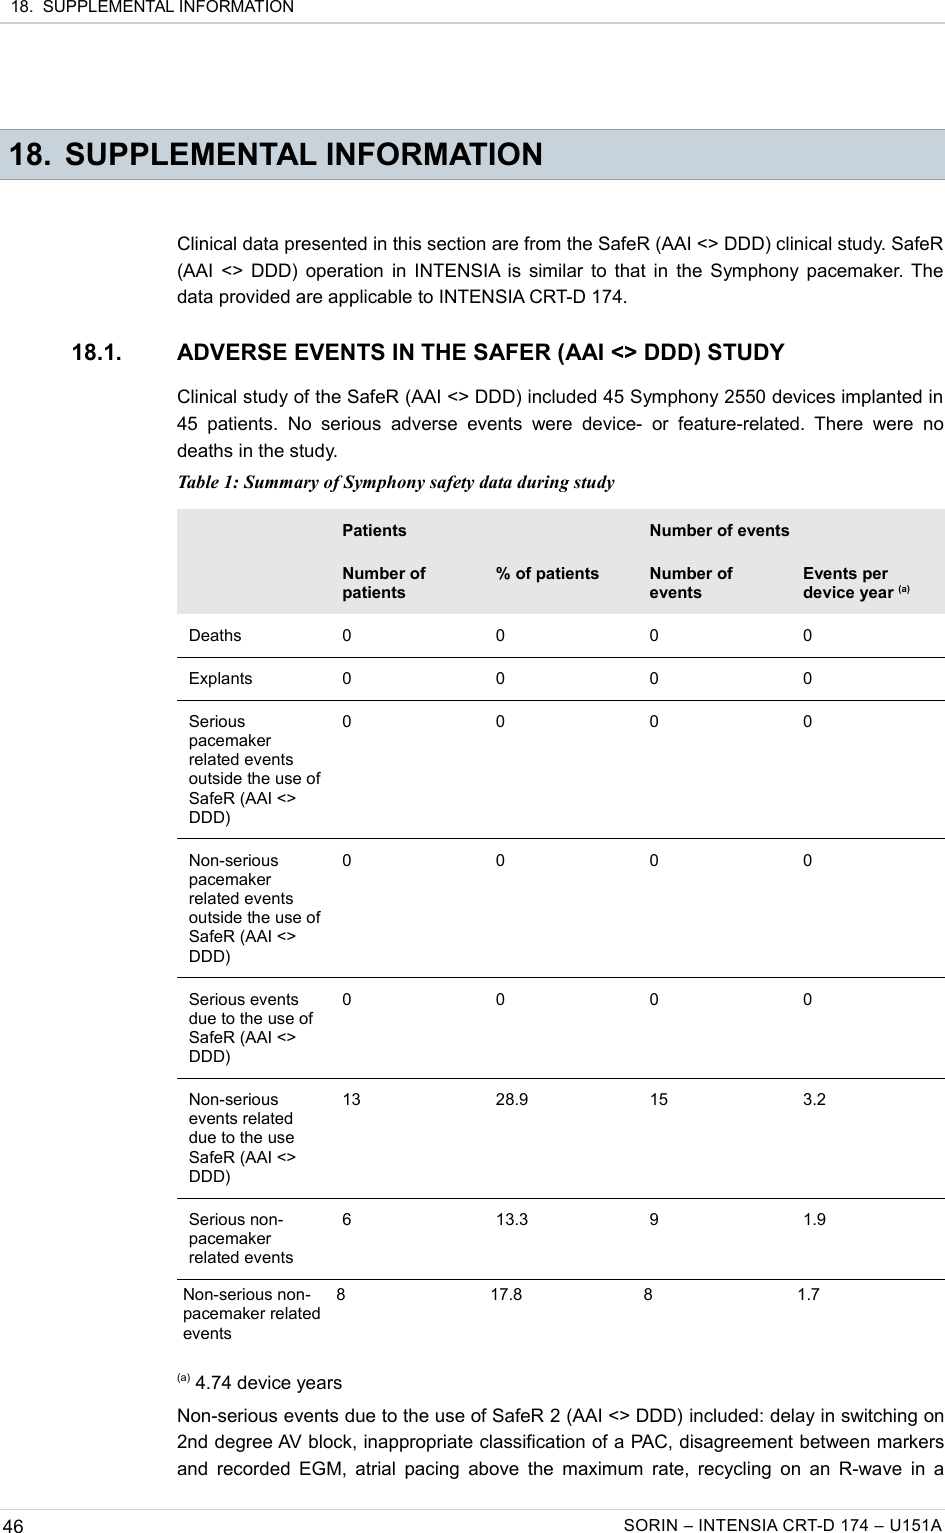  18.  SUPPLEMENTAL INFORMATION 18. SUPPLEMENTAL INFORMATIONClinical data presented in this section are from the SafeR (AAI &lt;&gt; DDD) clinical study. SafeR (AAI &lt;&gt; DDD) operation in INTENSIA is similar to that in the Symphony pacemaker. The data provided are applicable to INTENSIA CRT-D 174.18.1. ADVERSE EVENTS IN THE SAFER (AAI &lt;&gt; DDD) STUDYClinical study of the SafeR (AAI &lt;&gt; DDD) included 45 Symphony 2550 devices implanted in 45  patients. No  serious   adverse   events   were device-   or   feature-related.  There   were   no deaths in the study.Table 1: Summary of Symphony safety data during studyPatients Number of eventsNumber of patients% of patients Number of eventsEvents per device year (a)Deaths 0 0 0 0Explants 0 0 0 0Serious pacemaker related events outside the use of SafeR (AAI &lt;&gt; DDD)0000Non-serious pacemaker related events outside the use of SafeR (AAI &lt;&gt; DDD)0000Serious events due to the use of SafeR (AAI &lt;&gt; DDD)0000Non-serious events related due to the use SafeR (AAI &lt;&gt; DDD)13 28.9 15 3.2Serious non-pacemaker related events6 13.3 9 1.9Non-serious non-pacemaker related events8 17.8 8 1.7(a) 4.74 device yearsNon-serious events due to the use of SafeR 2 (AAI &lt;&gt; DDD) included: delay in switching on 2nd degree AV block, inappropriate classification of a PAC, disagreement between markers and recorded EGM, atrial pacing above the maximum rate, recycling on an R-wave in a 46 SORIN – INTENSIA CRT-D 174 – U151A